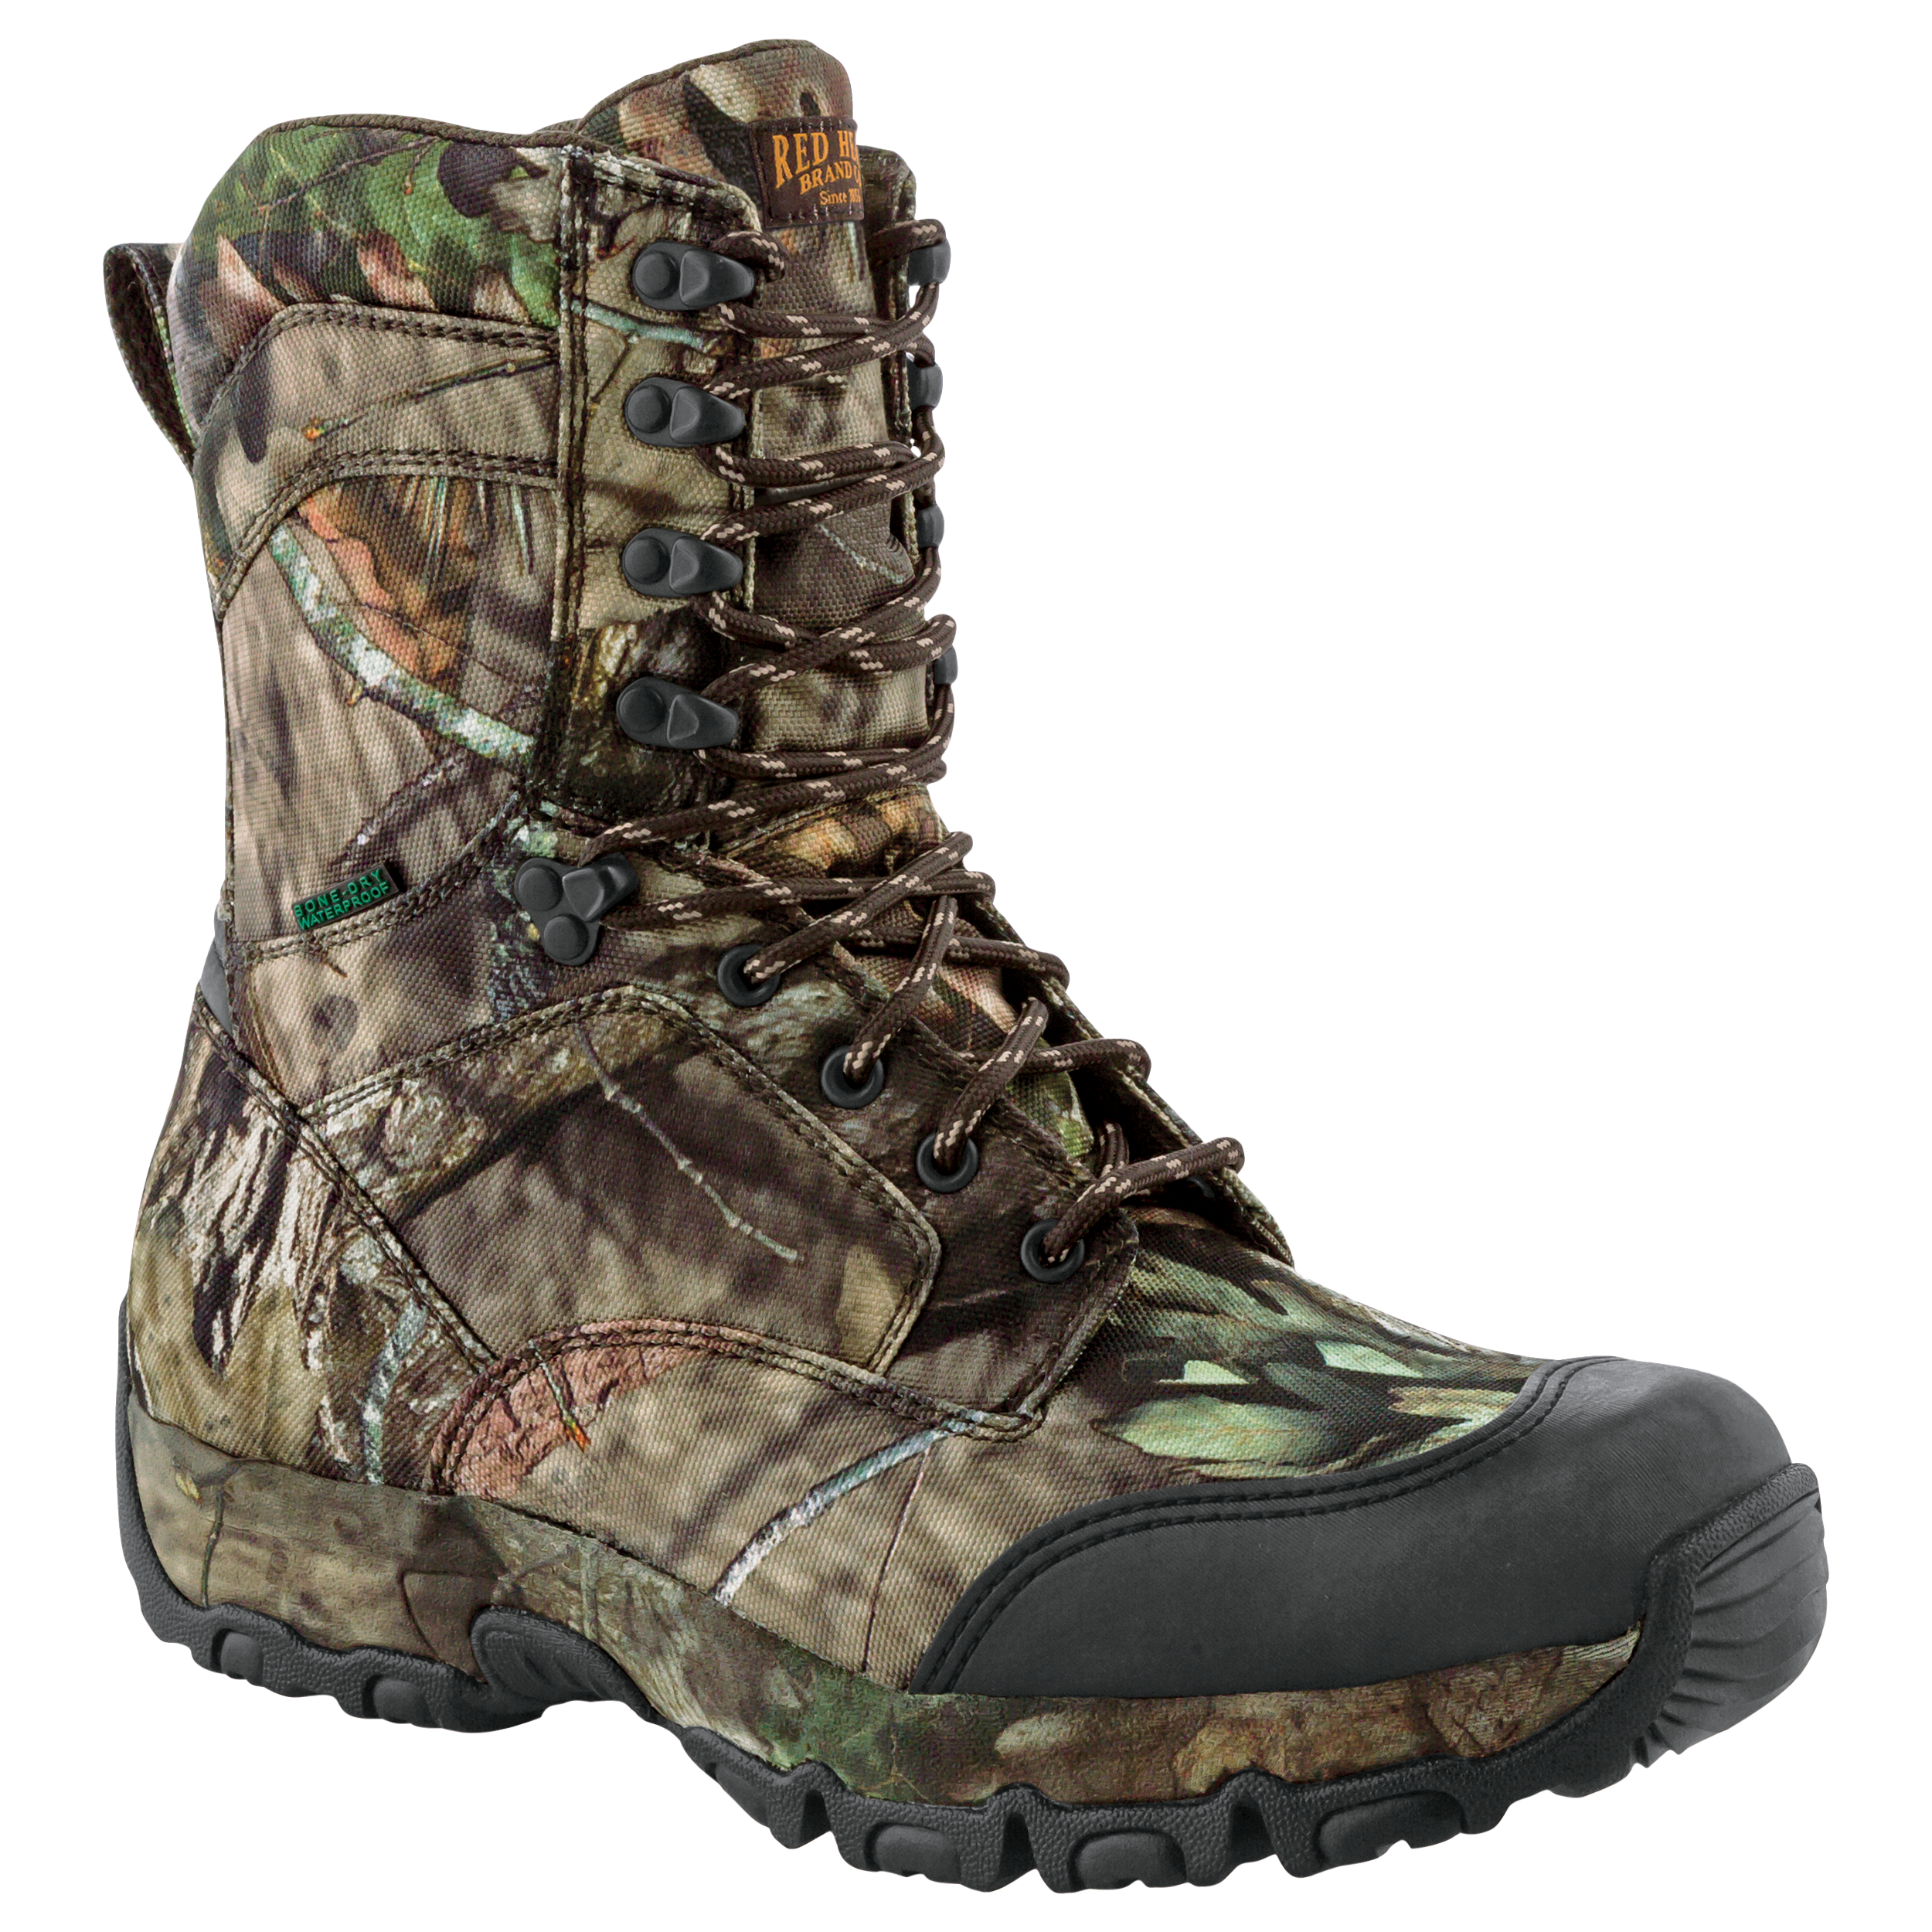 RedHead Big Horn II Bone-Dry Insulated Waterproof Hunting Boots for Men ...